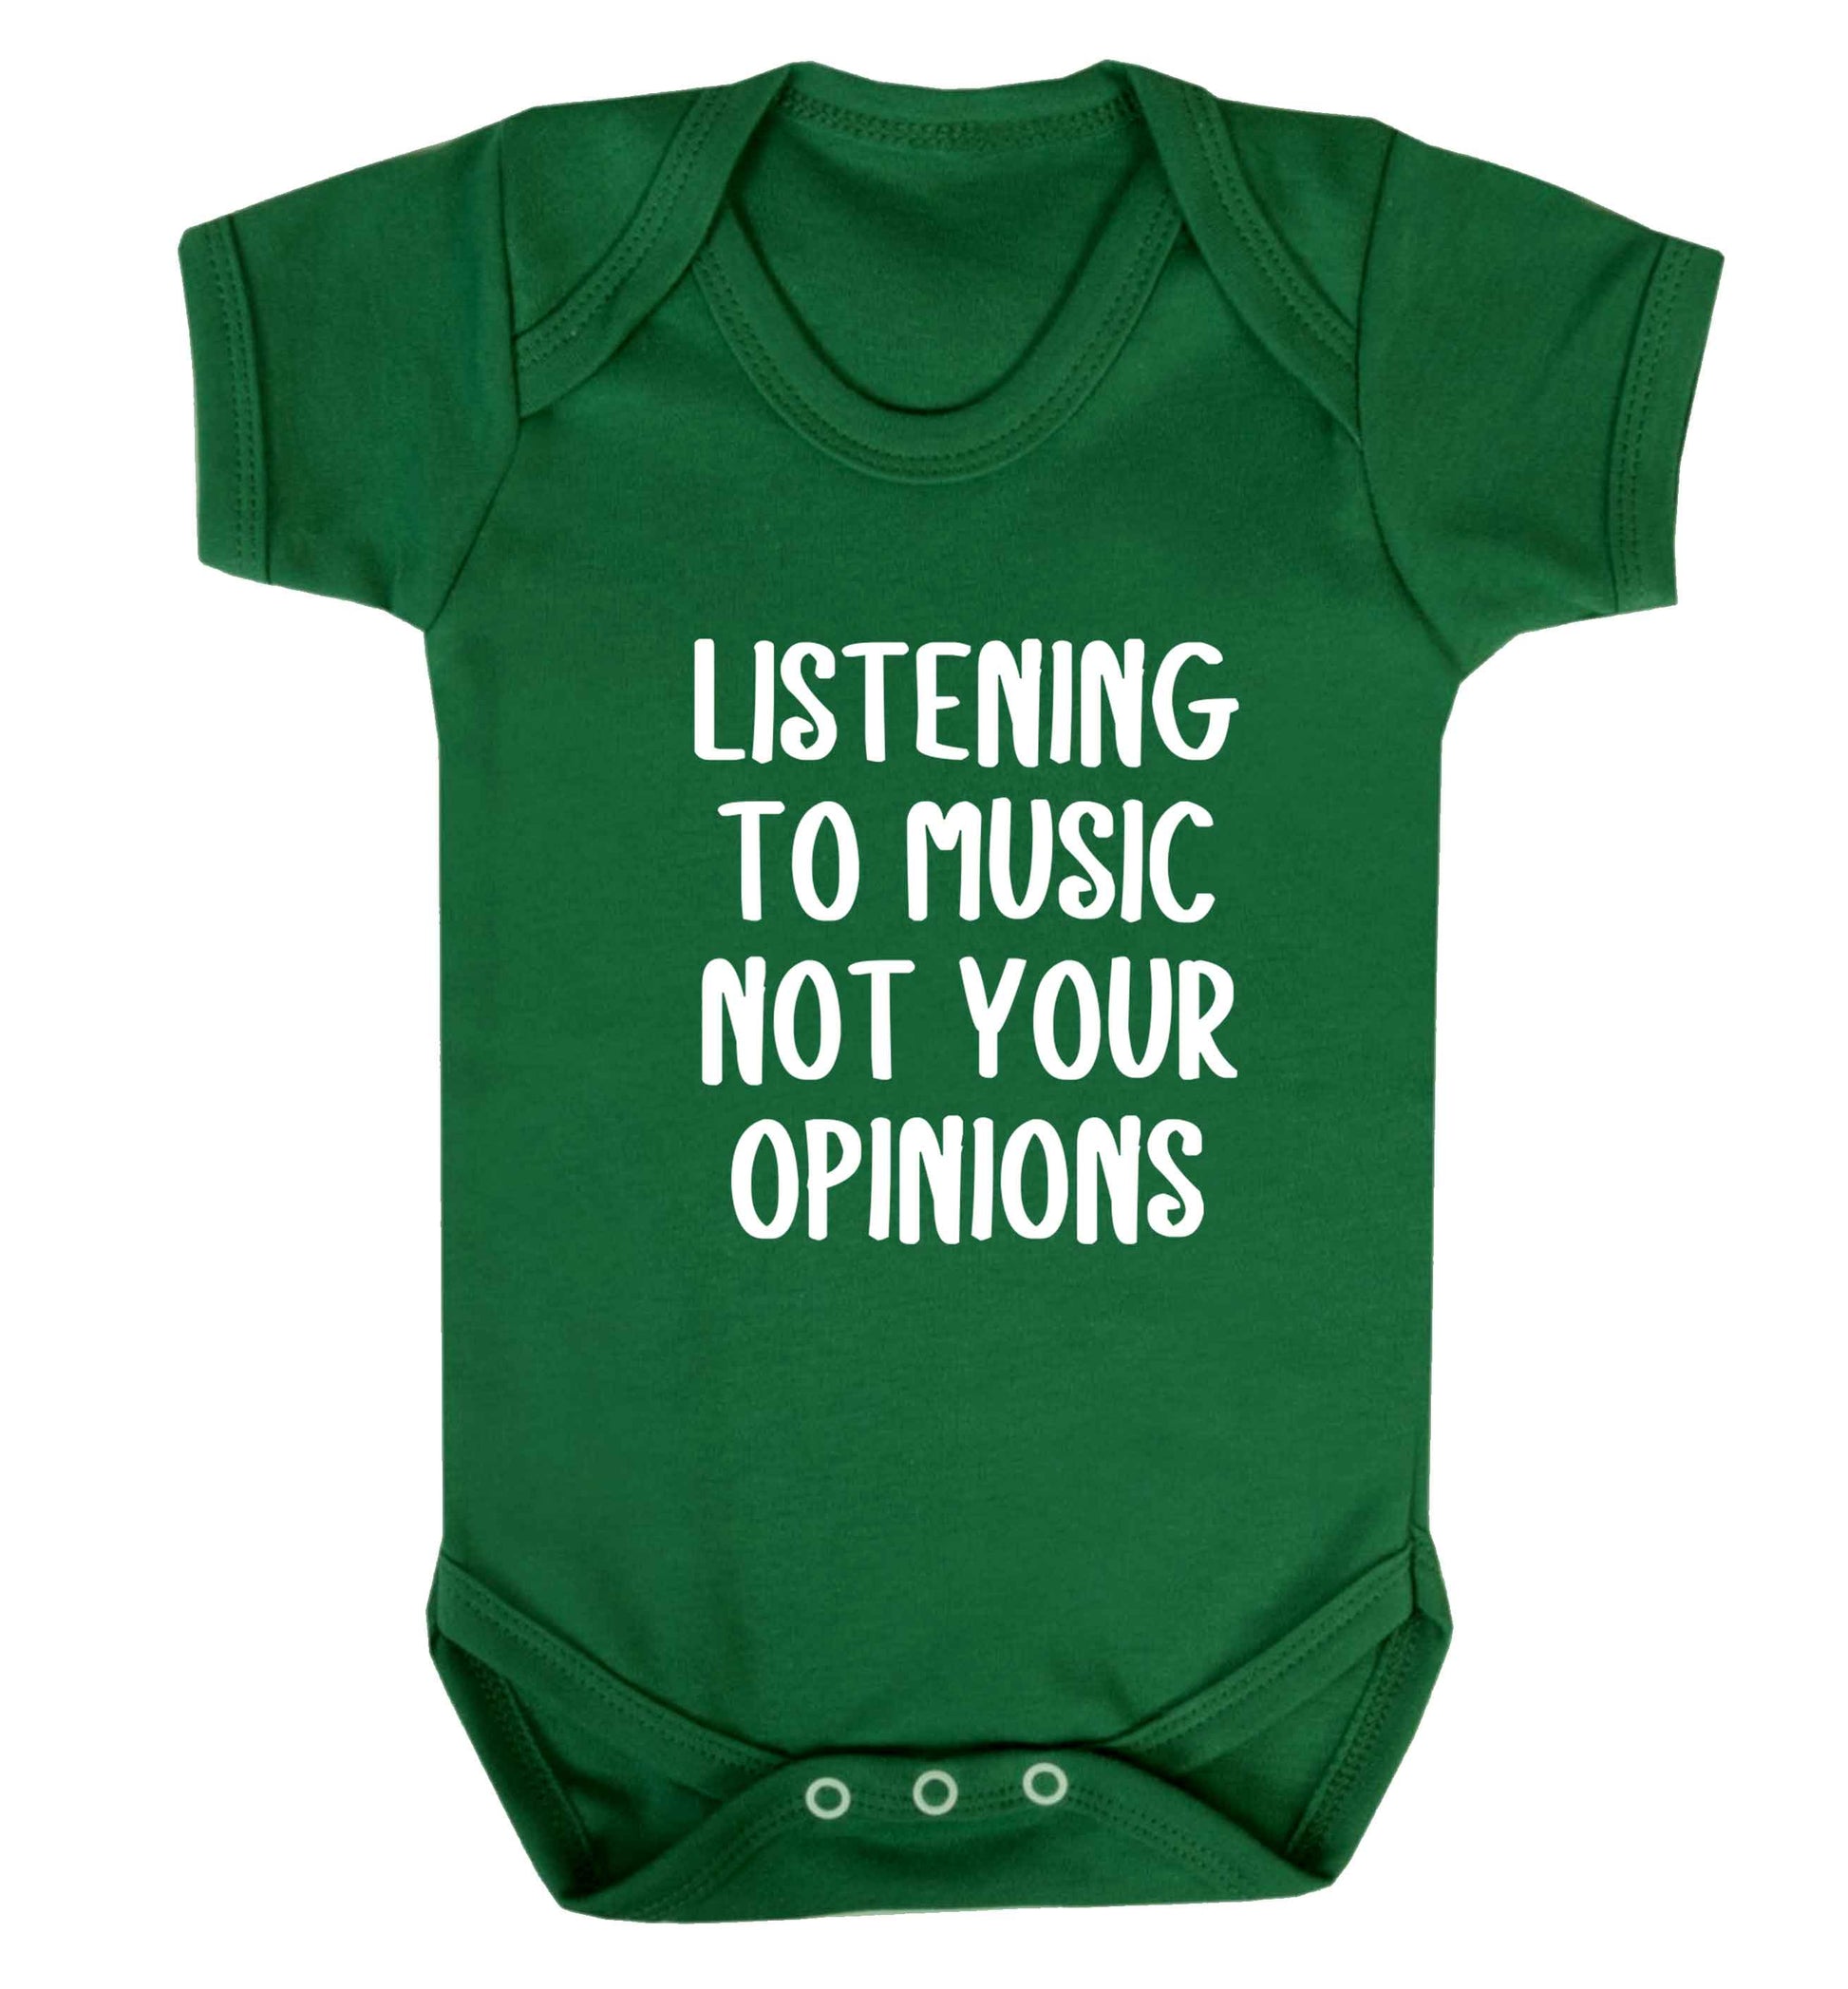 Listening to music not your opinions baby vest green 18-24 months